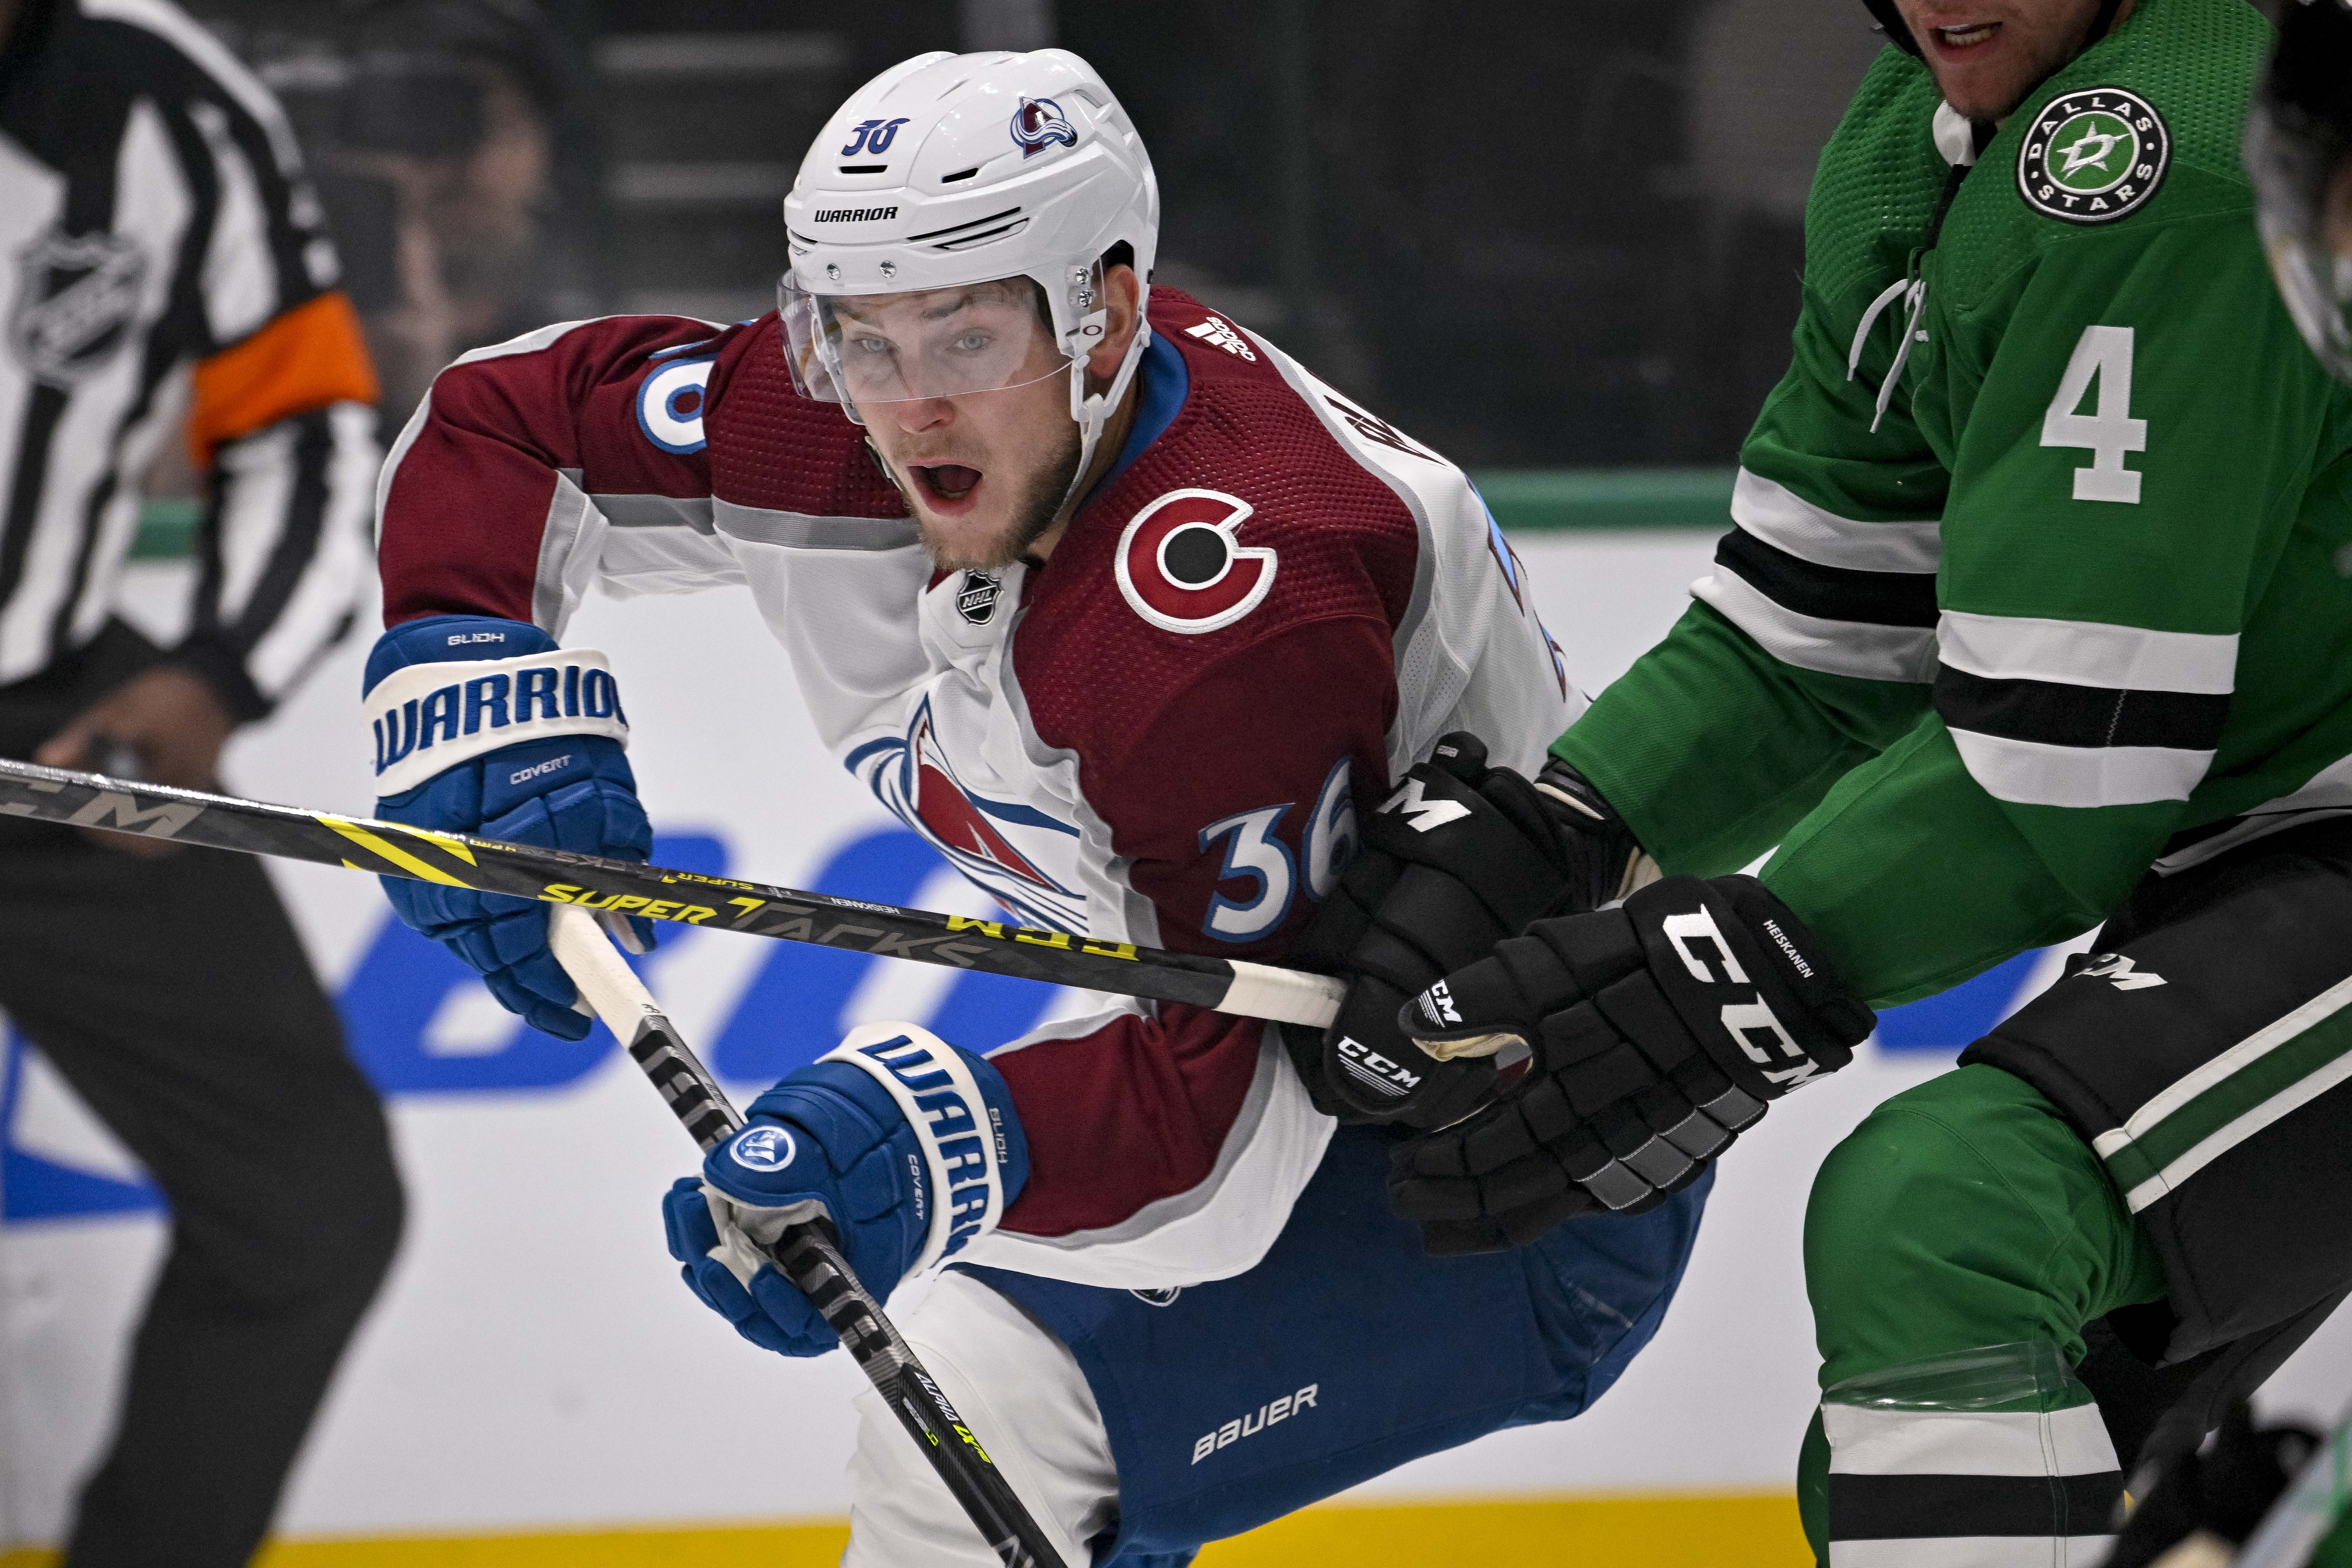 Recap: “Bland” Avalanche complete the job 3-1 over Devils - BVM Sports